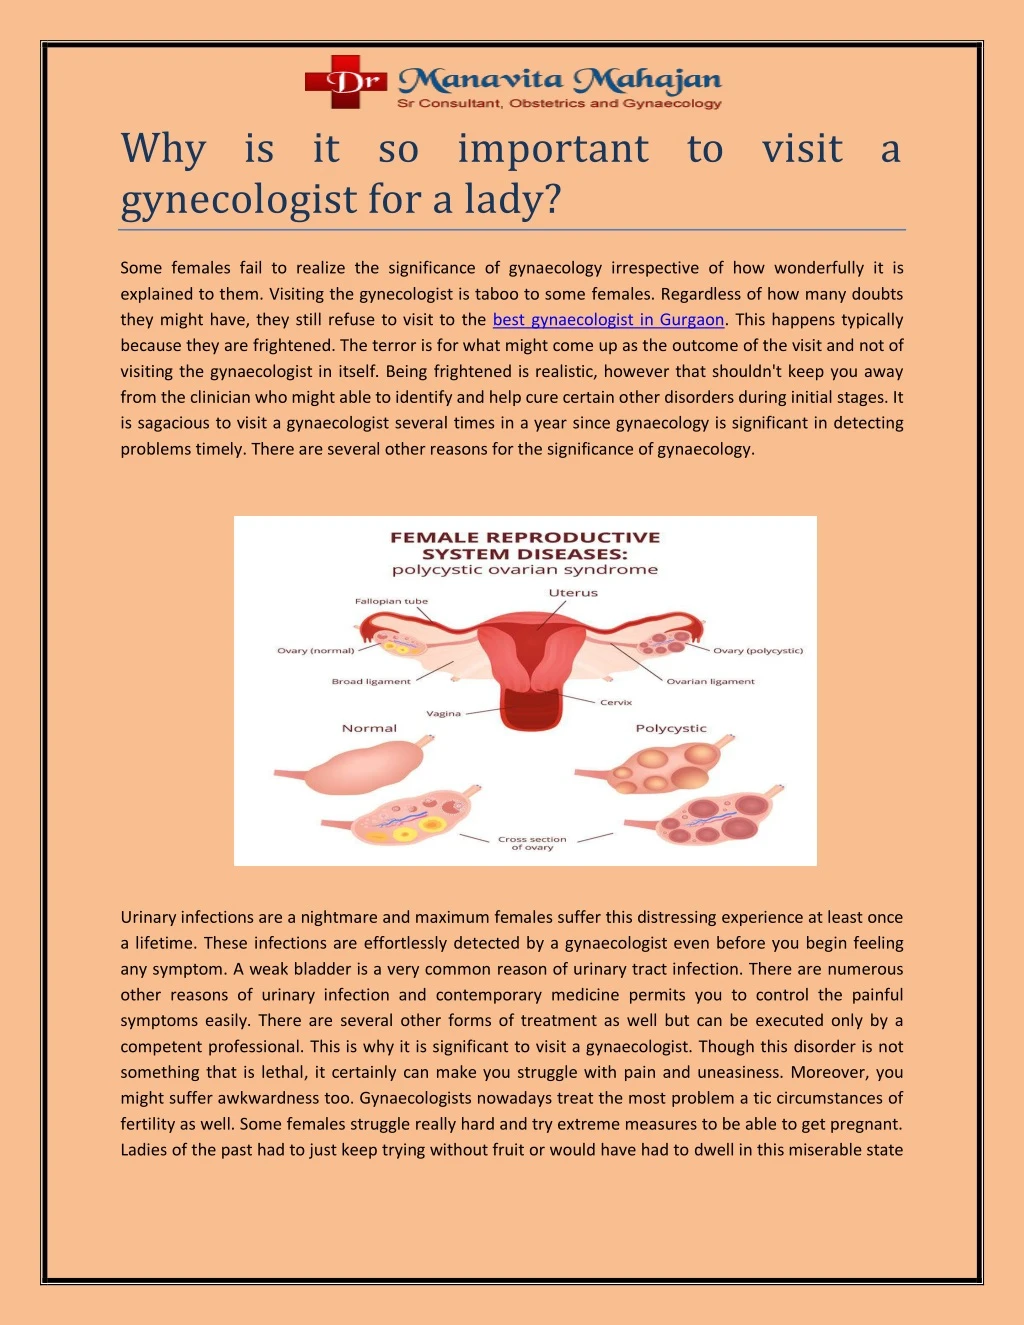 why is it so important to visit a gynecologist